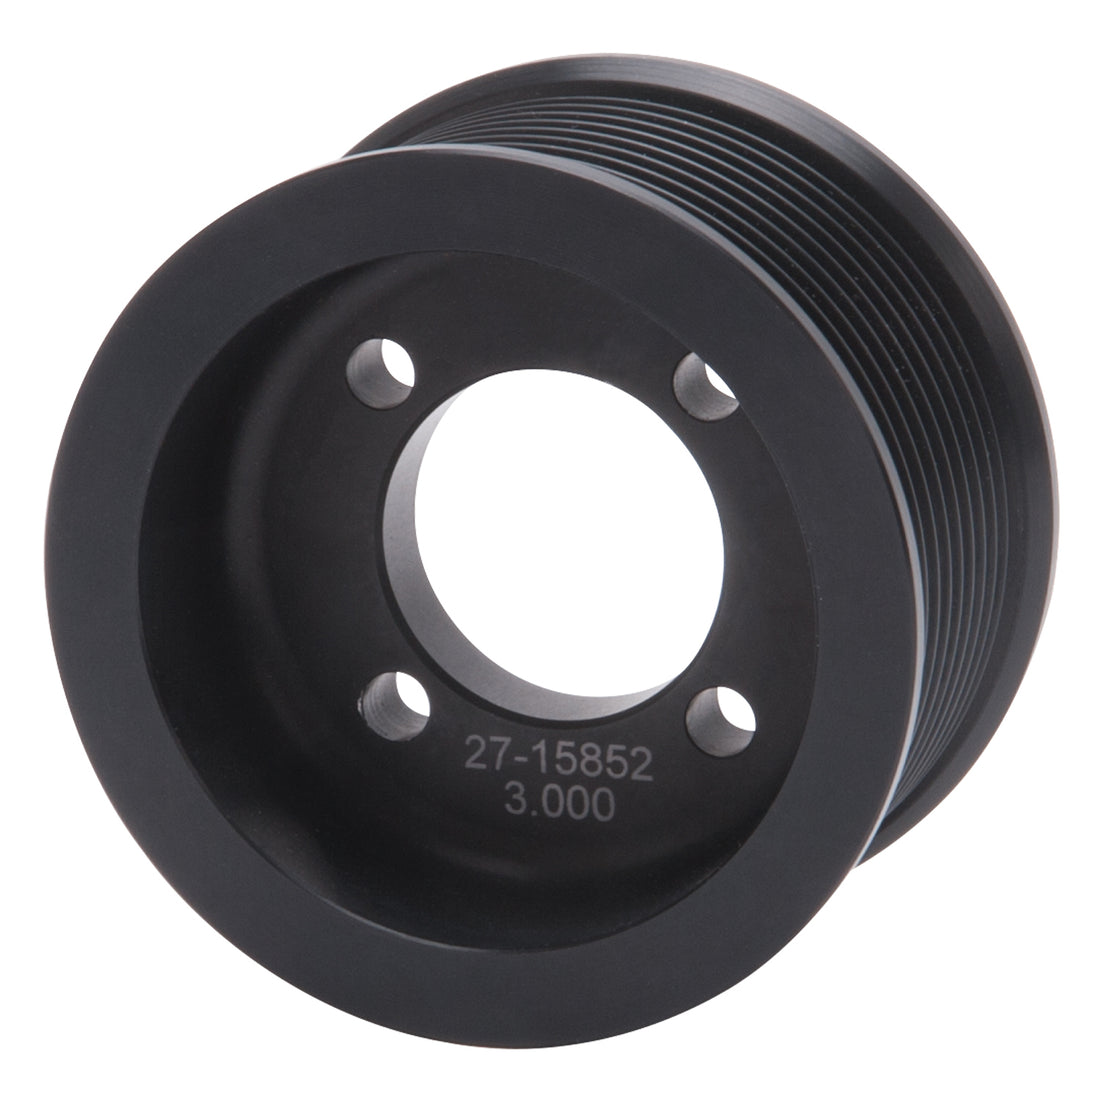 Edelbrock Competition Supercharger Pulley #15852 3.000 in. 10-Rib Black Anodized Edelbrock